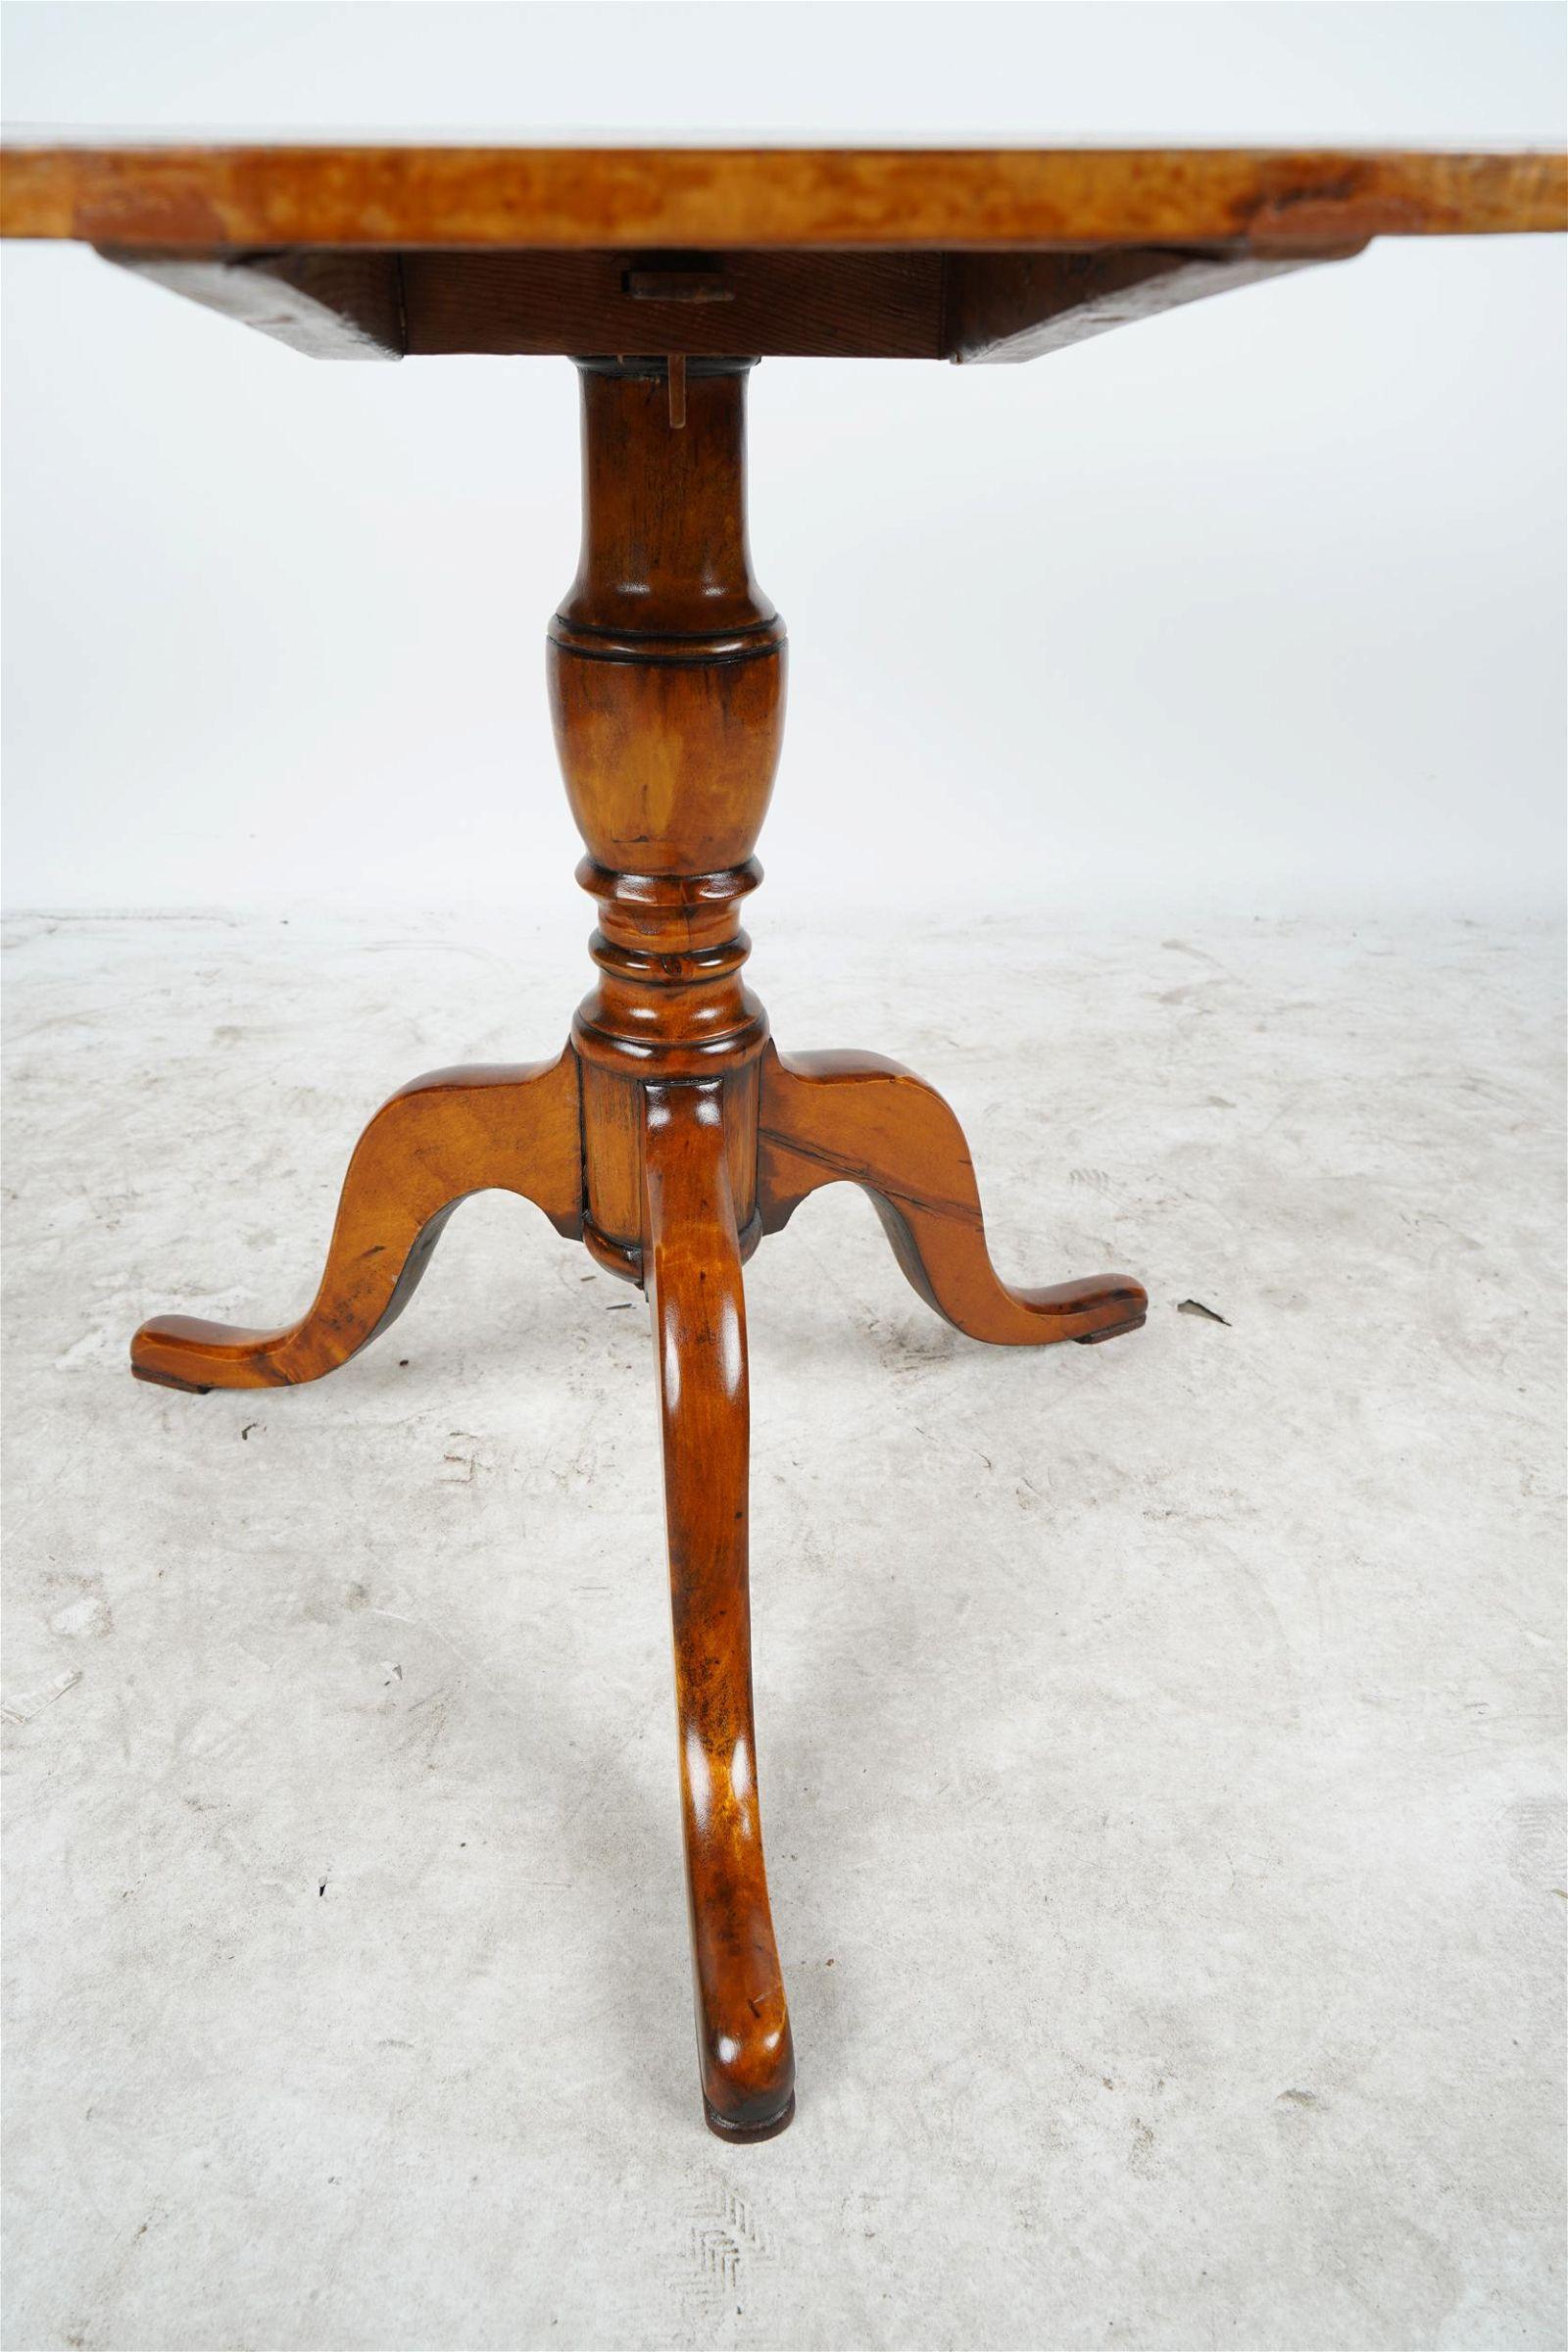 Antique Period American Federal Period Maple Tilt Top Side Table Late 18th C In Good Condition For Sale In Los Angeles, CA